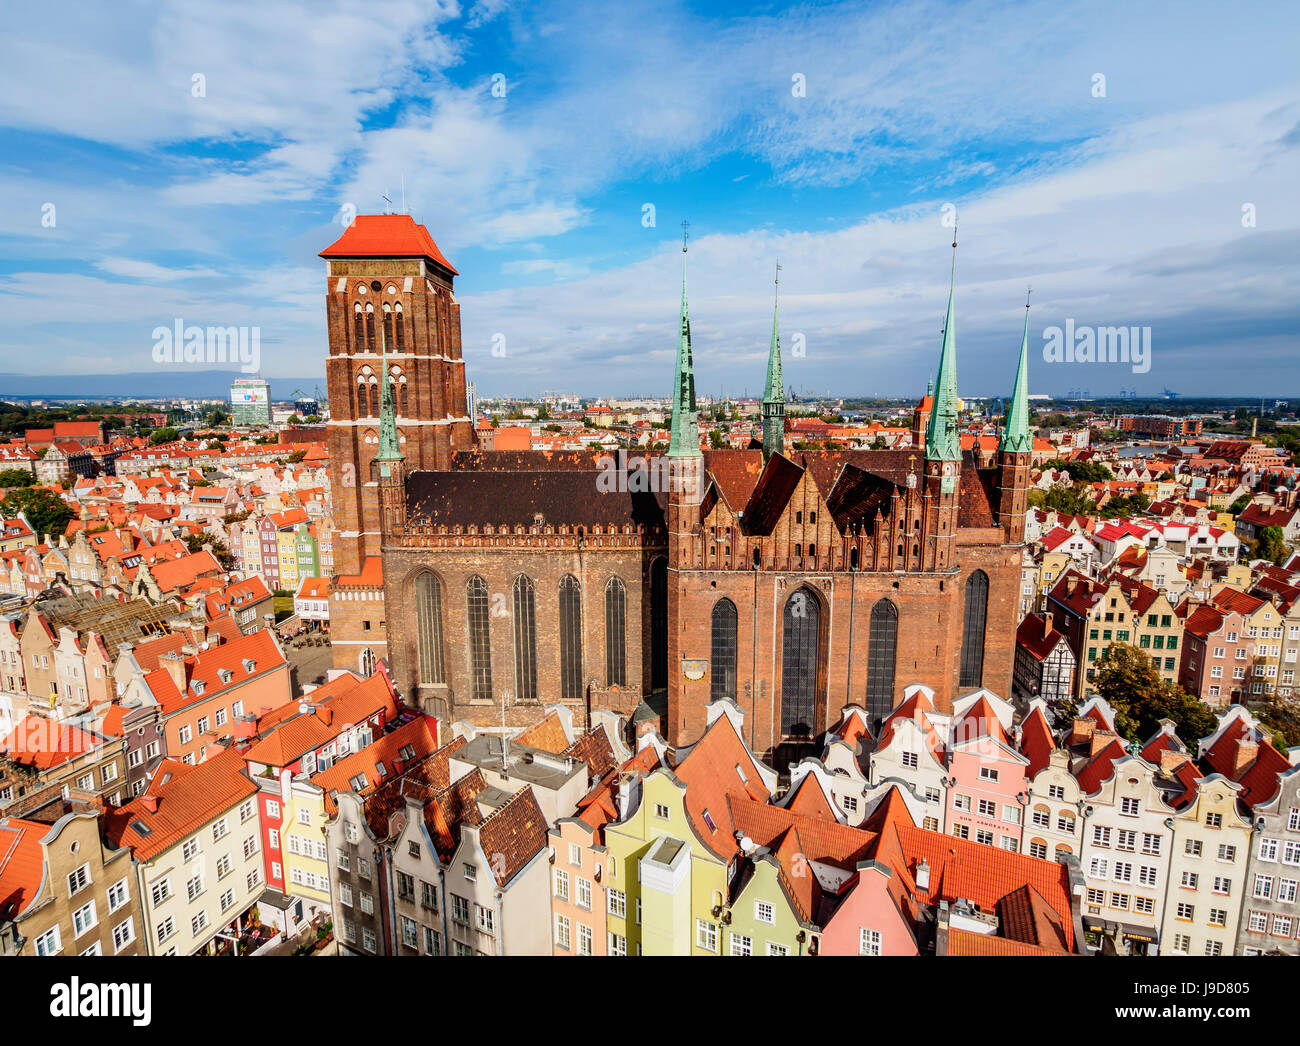 Elevated view of the Old Town, St. Mary's Basilica, Gdansk, Pomeranian Voivodeship, Poland, Europe Stock Photo